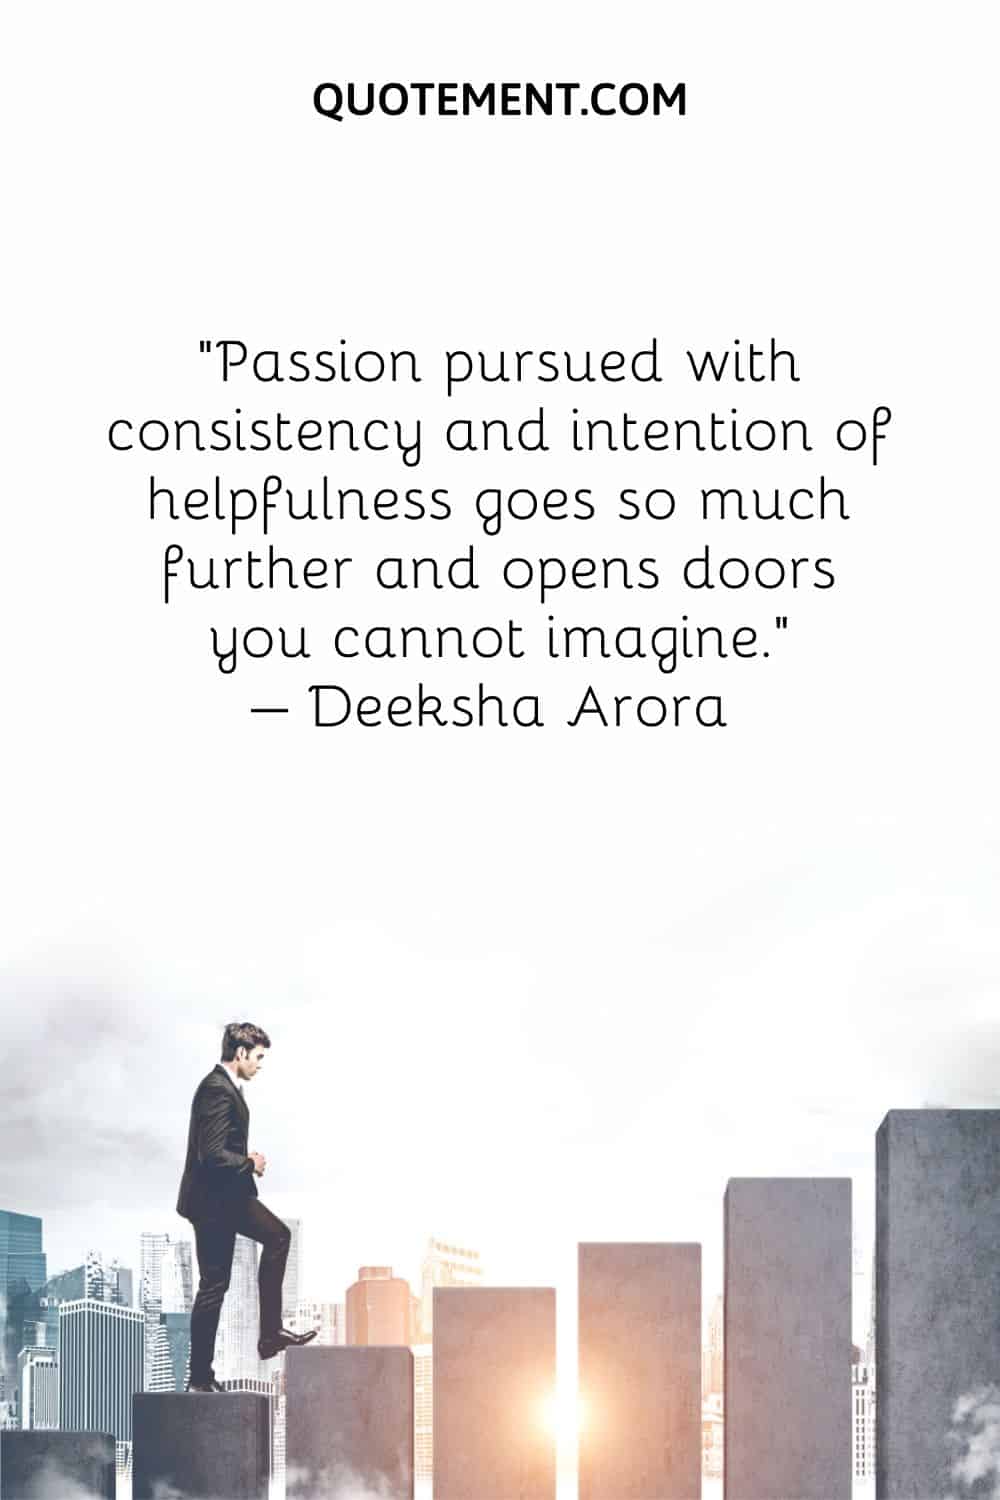 Passion pursued with consistency and intention of helpfulness goes so much further and opens doors you cannot imagine